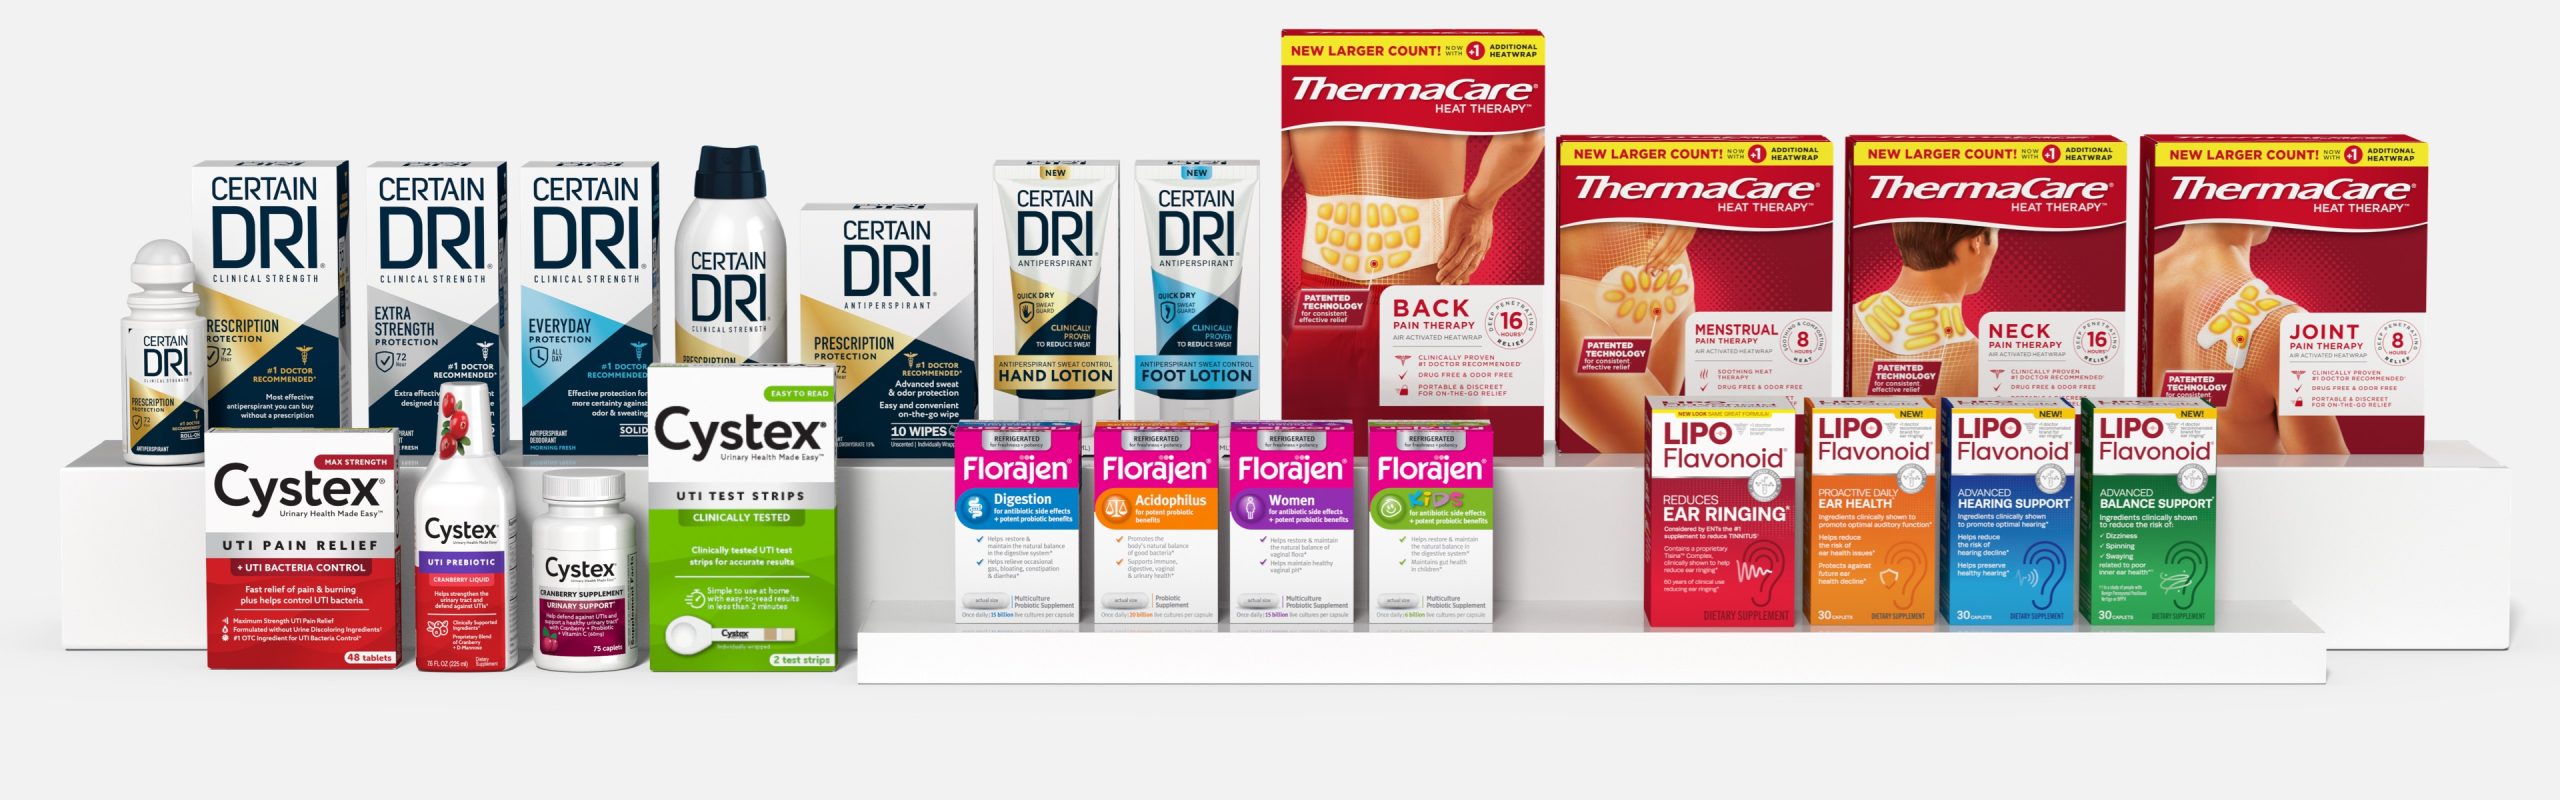 Bridges Family of Healthcare Products